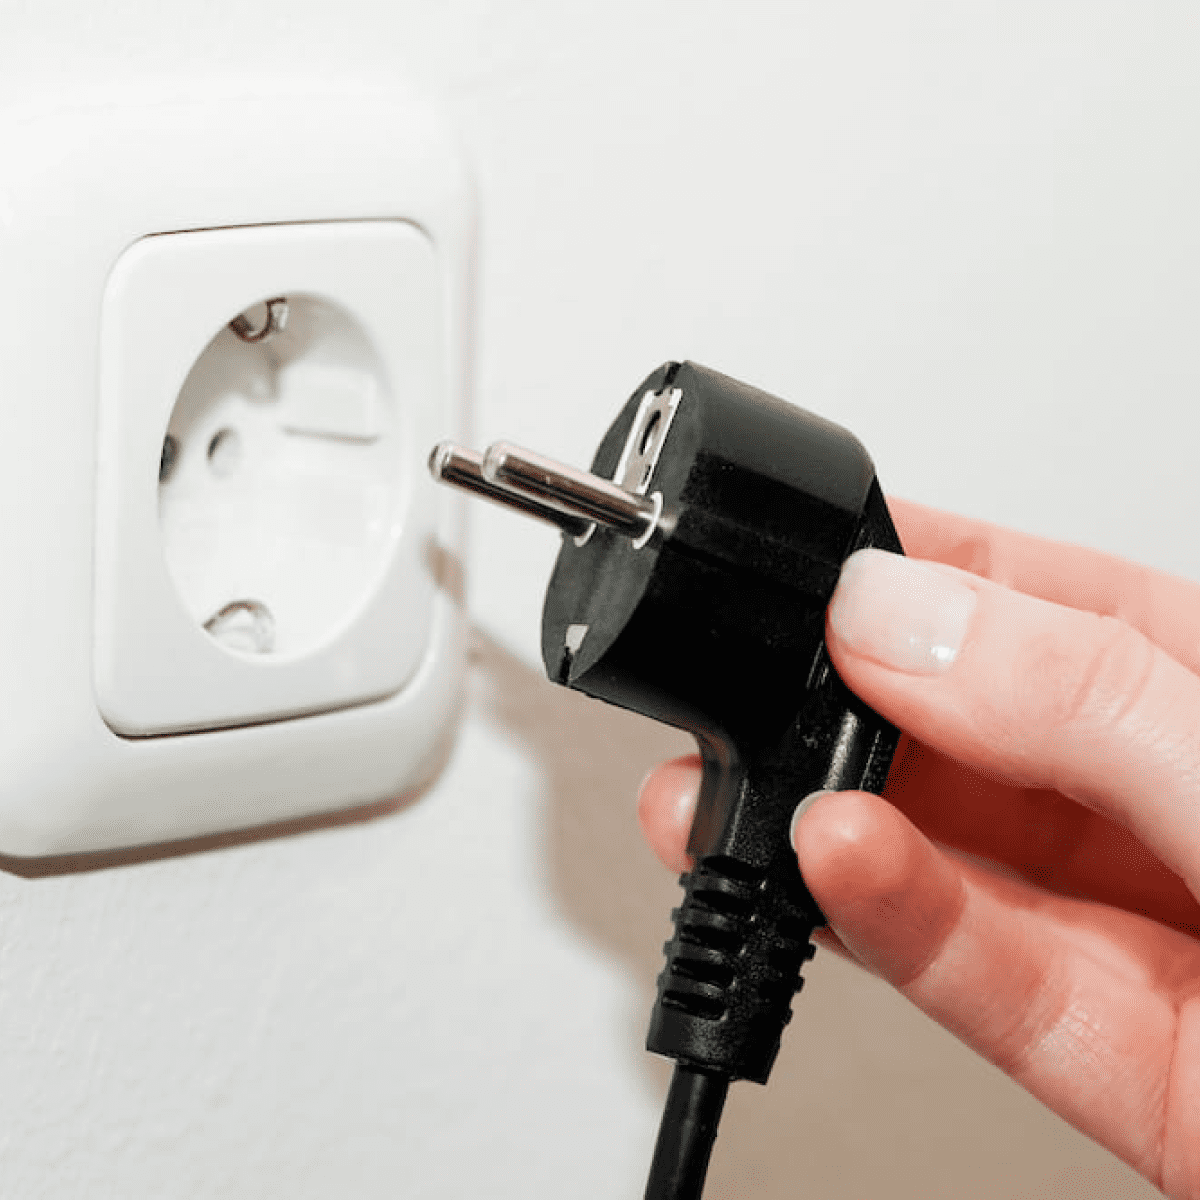 Person holding a schuko cable to plug it into the power socket